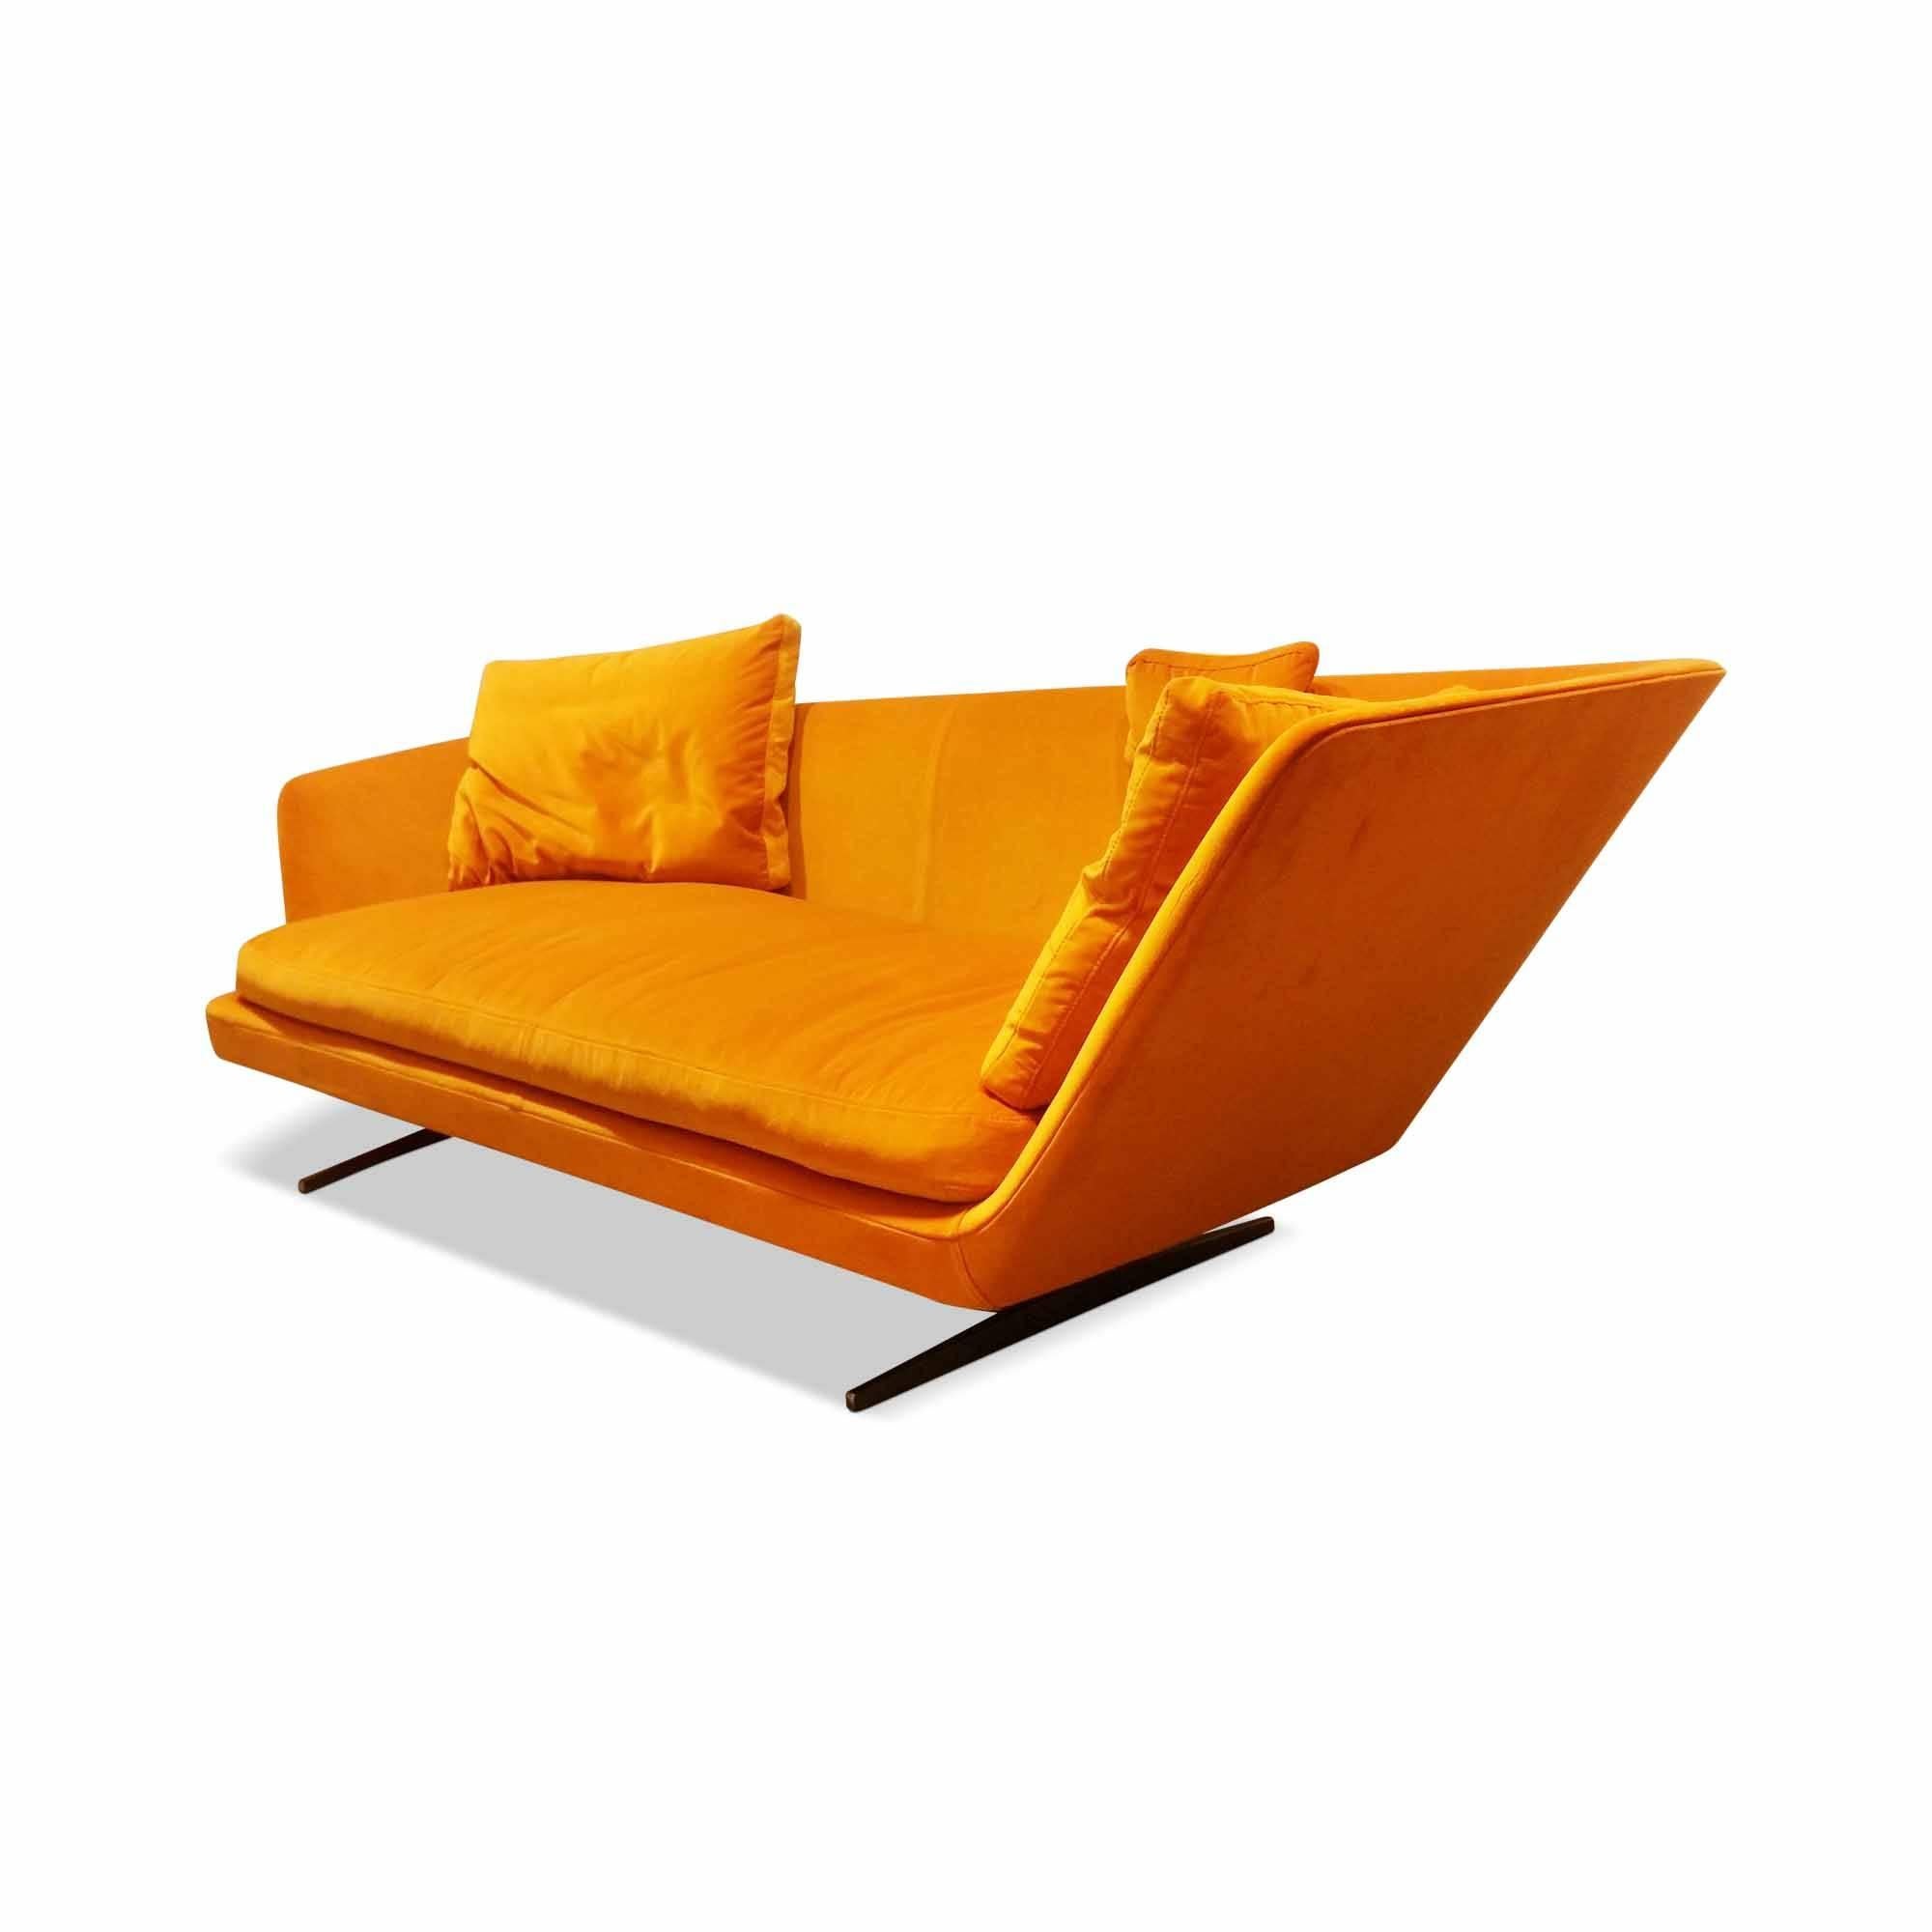 We are delighted to present to you the stunning Chaiselounge “Zeus”, designed and manufactured by Flexform in Italy, that unites sophisticated design with pleasant comfort for our exclusive clients. The aesthetic Chaiselounge, that is finished in